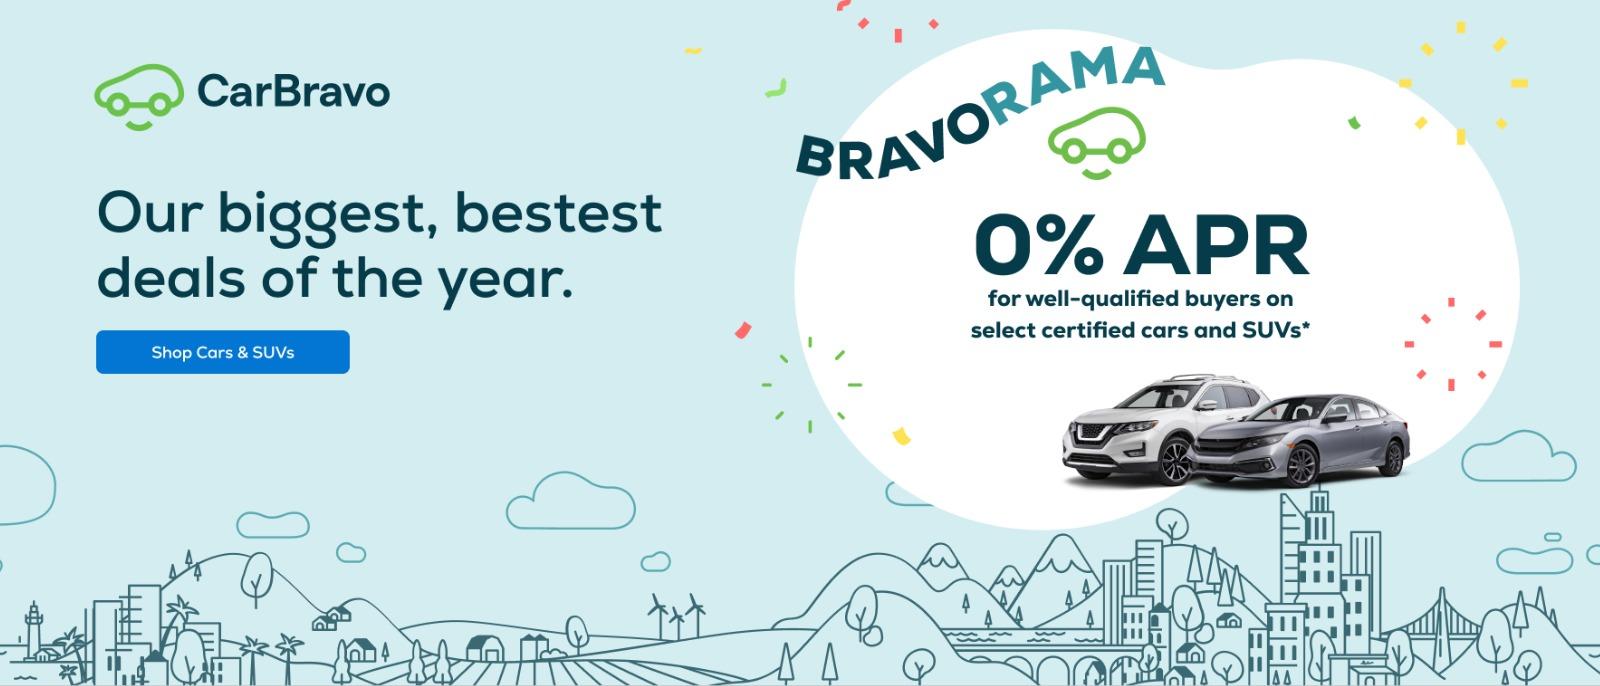 Bravorama our biggest, bestest deals of the year, 0% APR